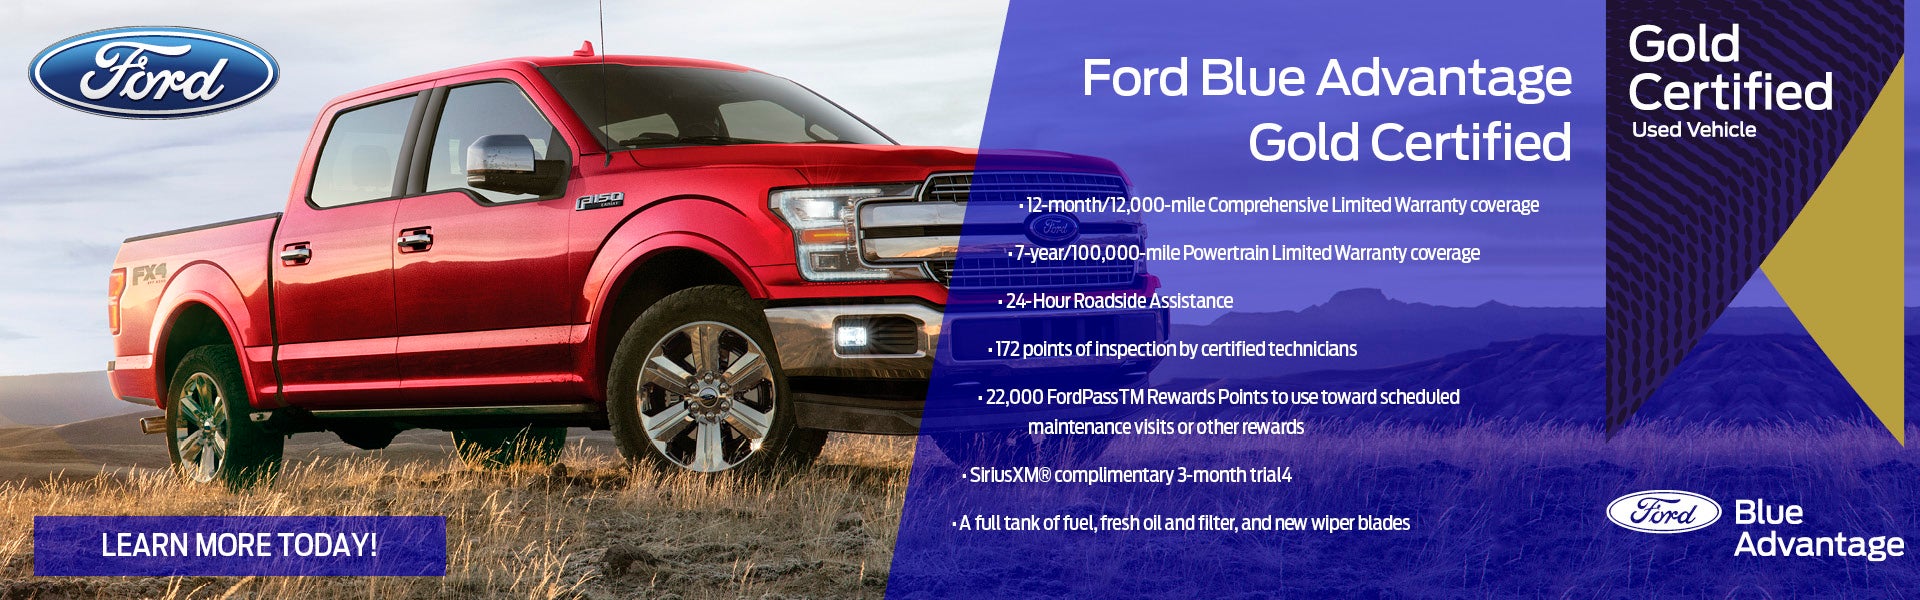 FordBlue Advantage Gold Certified